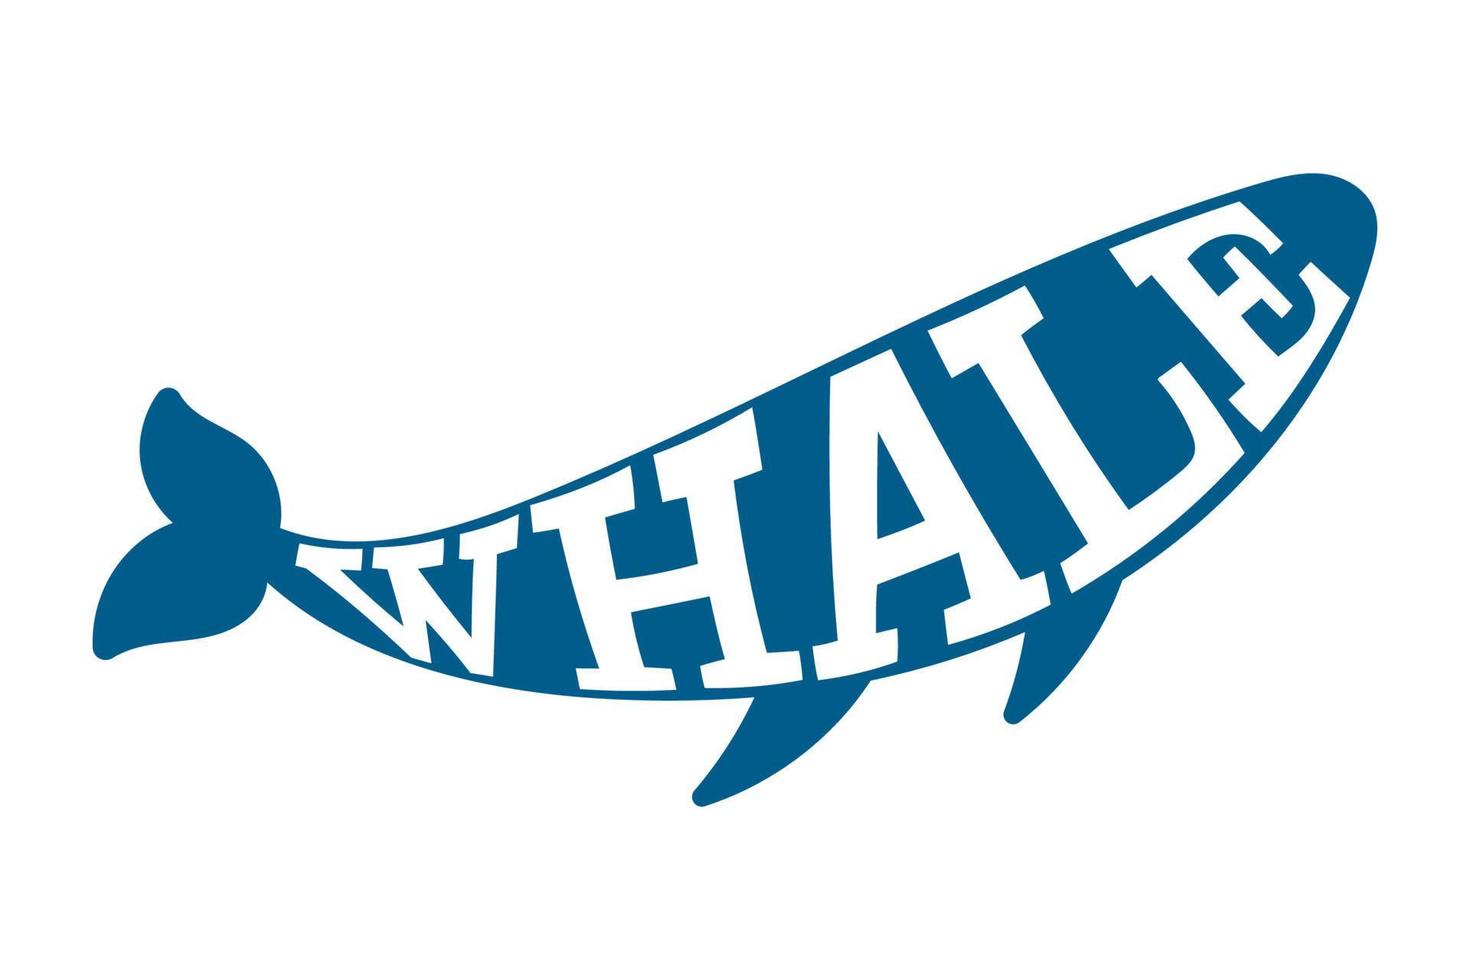 Hand drawn lettering phrase in whale silhouette, t shirt design. Vector illustration in white background.